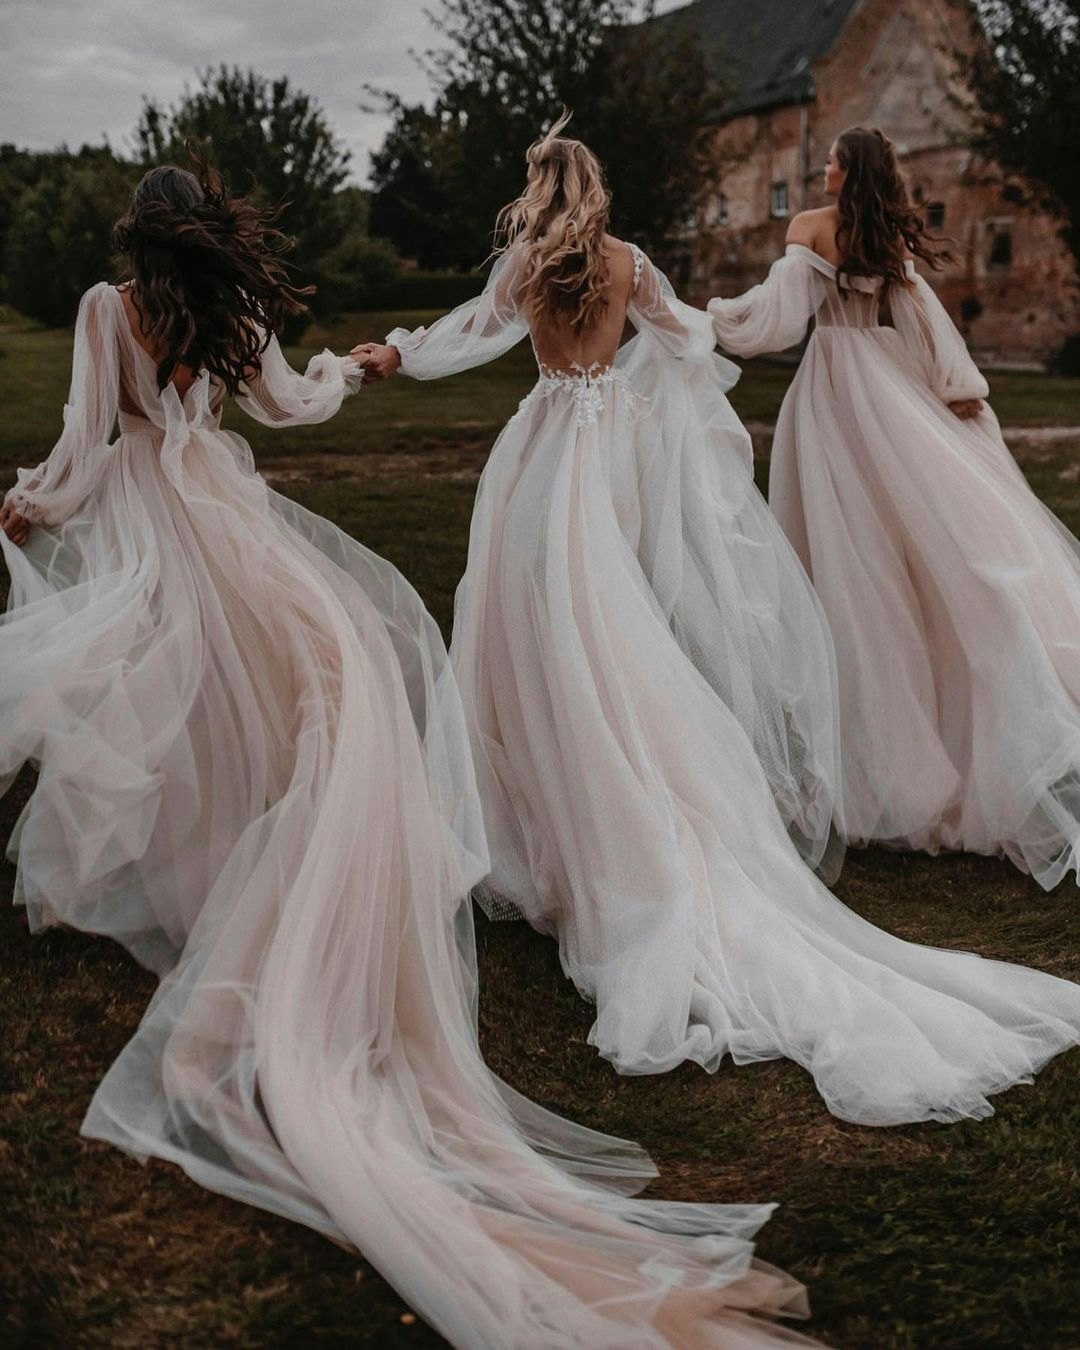 3 brides wearing dresses with long flowing trains 